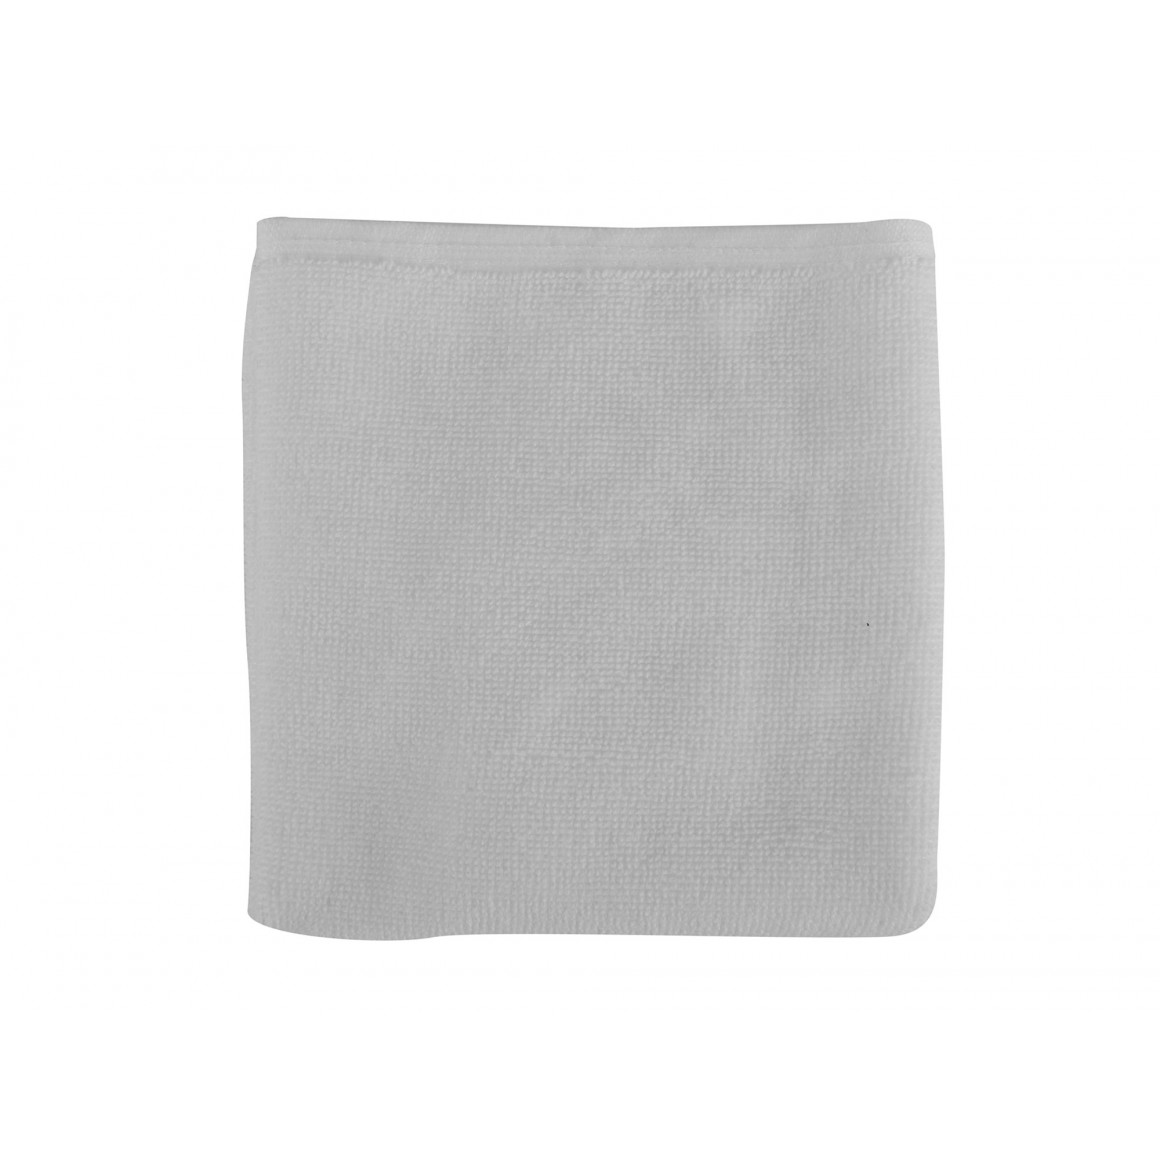 hand towel RESTFUL WHITE 450GSM 30X50